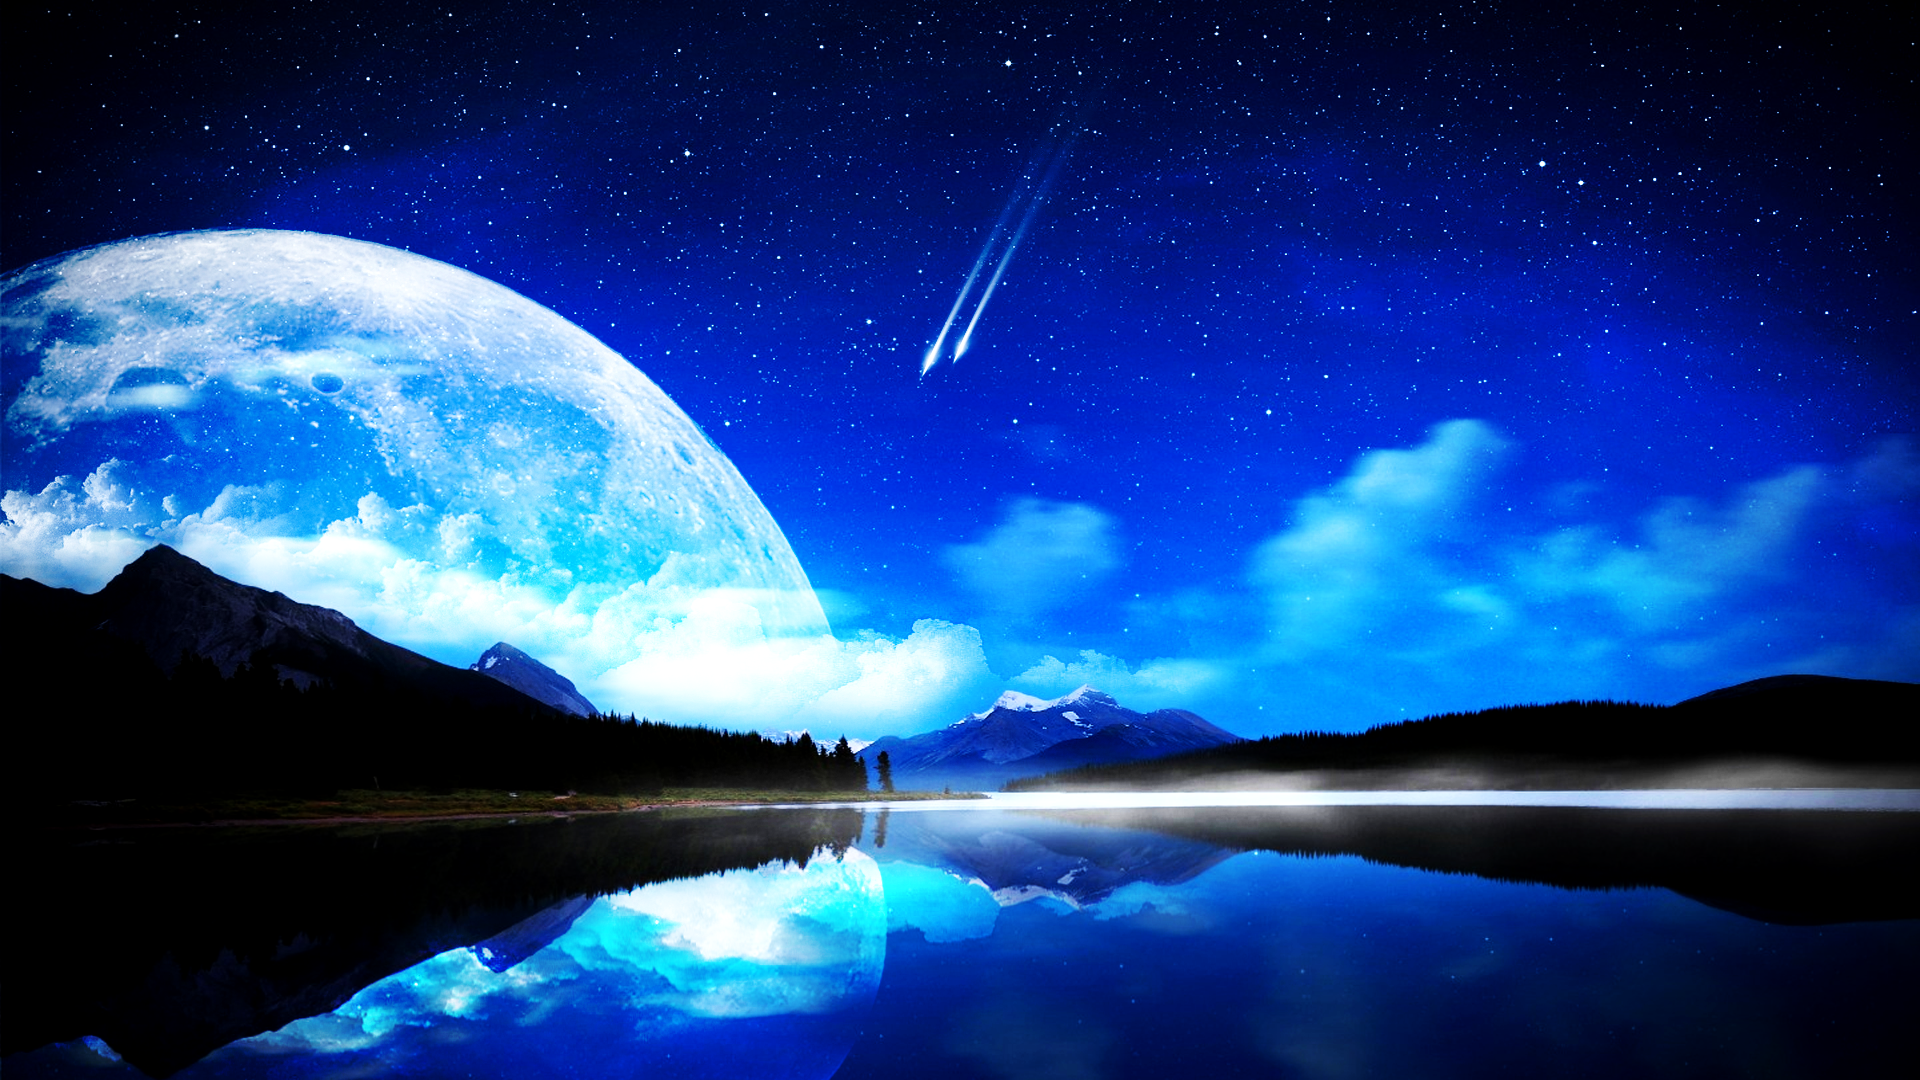 The Blue Moon HD Wallpaper Background Image Art